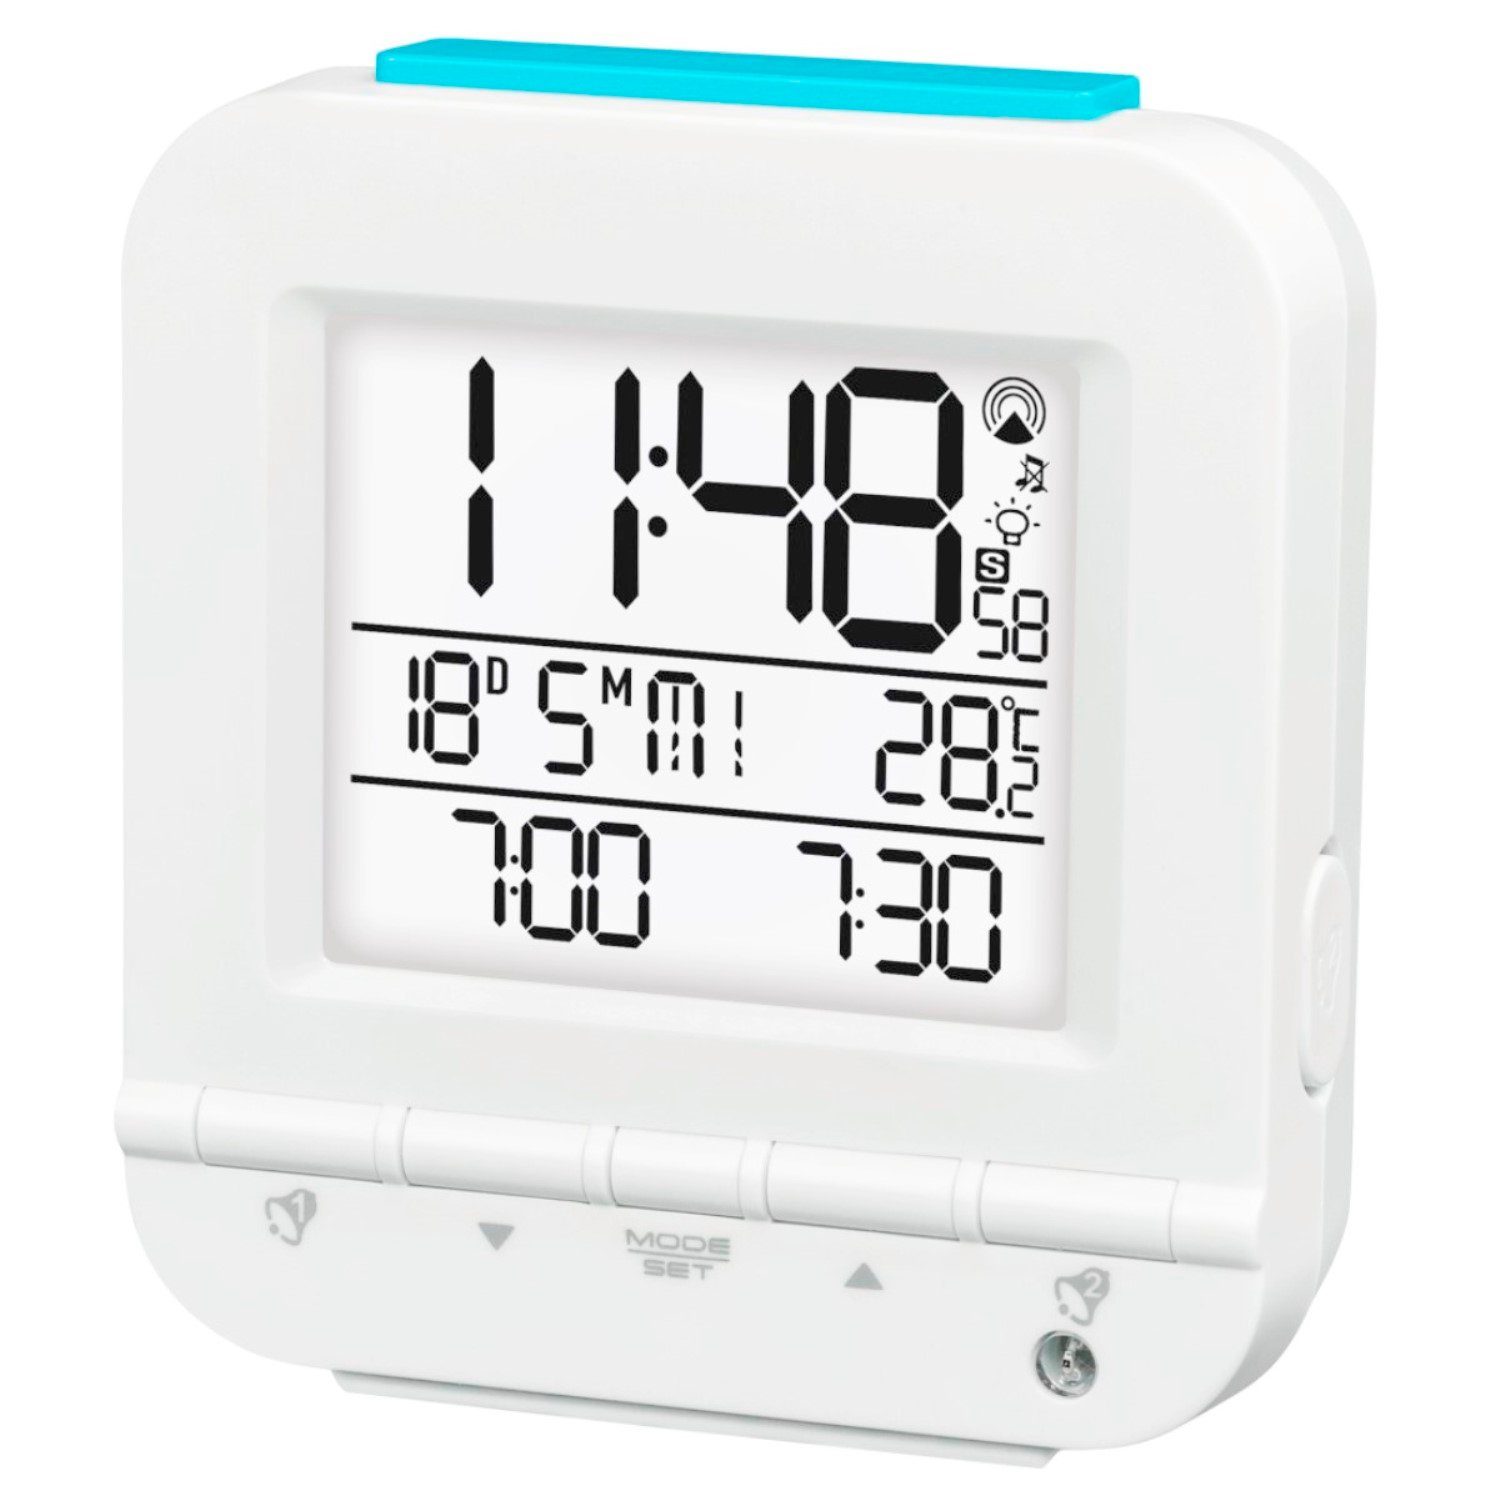 Digital Funk-Projektionswecker Alarmwecker LCD LED Tischuhr Thermometer Snooze 